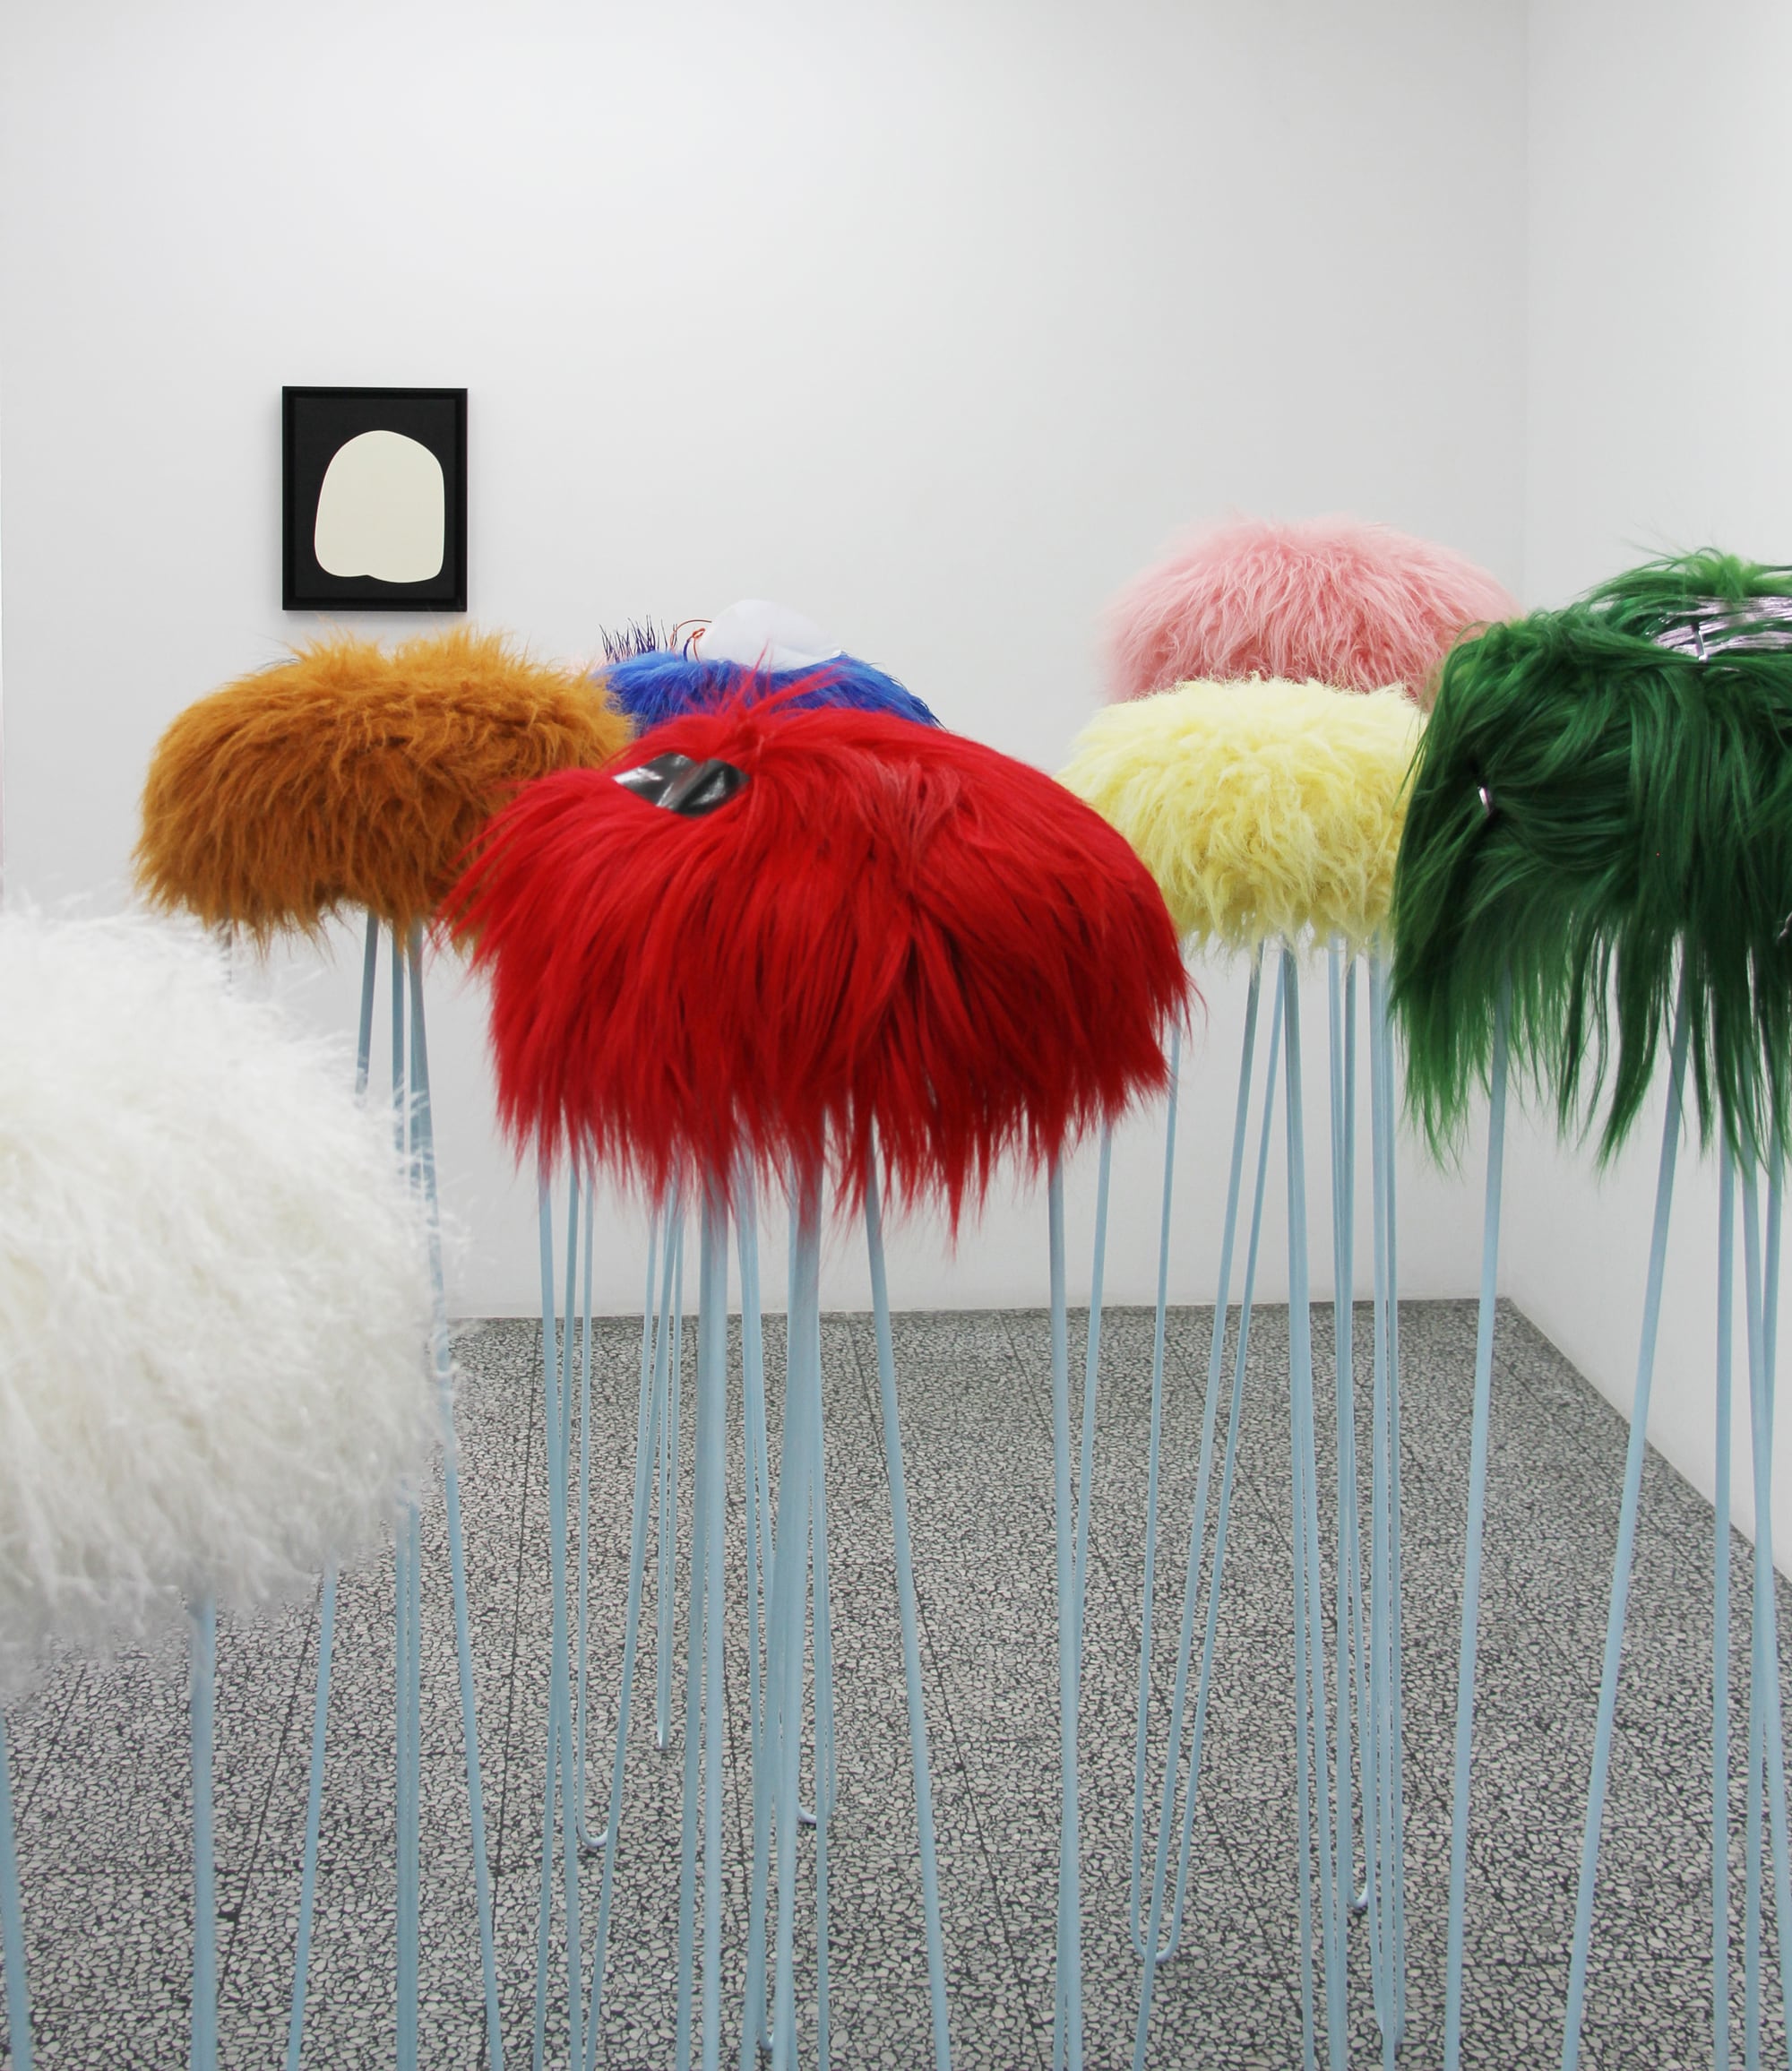 Image 02: John Meade, 'The Puschelhockers' (2018), fake and real fur, steel, acrylic paint, hairclips, plastic, chain, feathers, eight pieces, 2m high. Images courtesy of the artist and Sutton Gallery. Photo: Andrew Browne / Brent Harris, 'Bubble' (1995), oil on canvas, 54 43 cm (framed). Image courtesy of the artist and Tolarno Galleries. Photo: Andrew Browne.